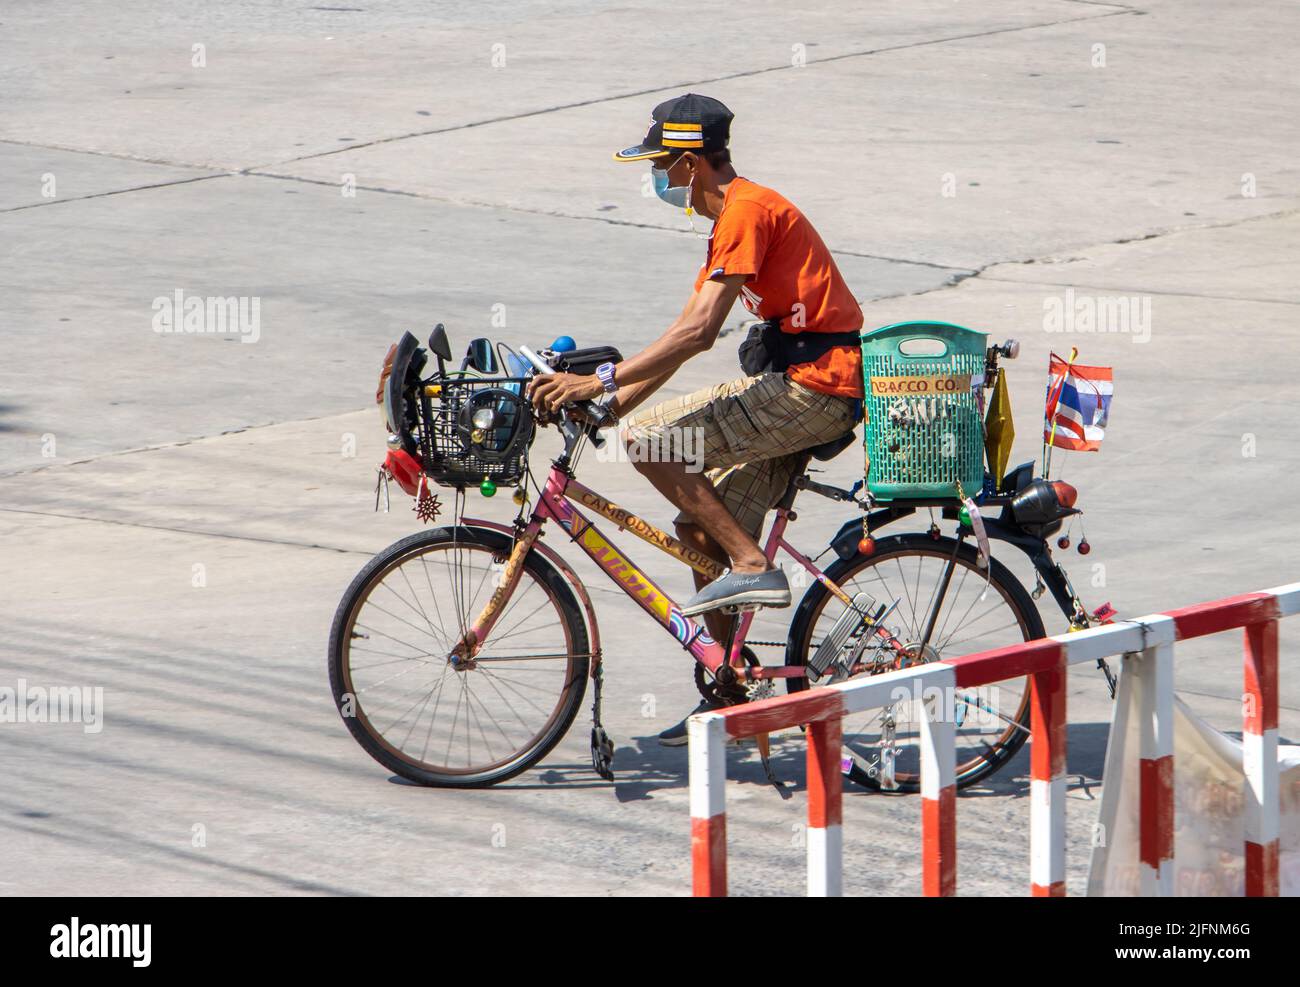 SAMUT PRAKAN, THAILAND, MAR 28 2022, A man ride on a  bicycle with individually design Stock Photo